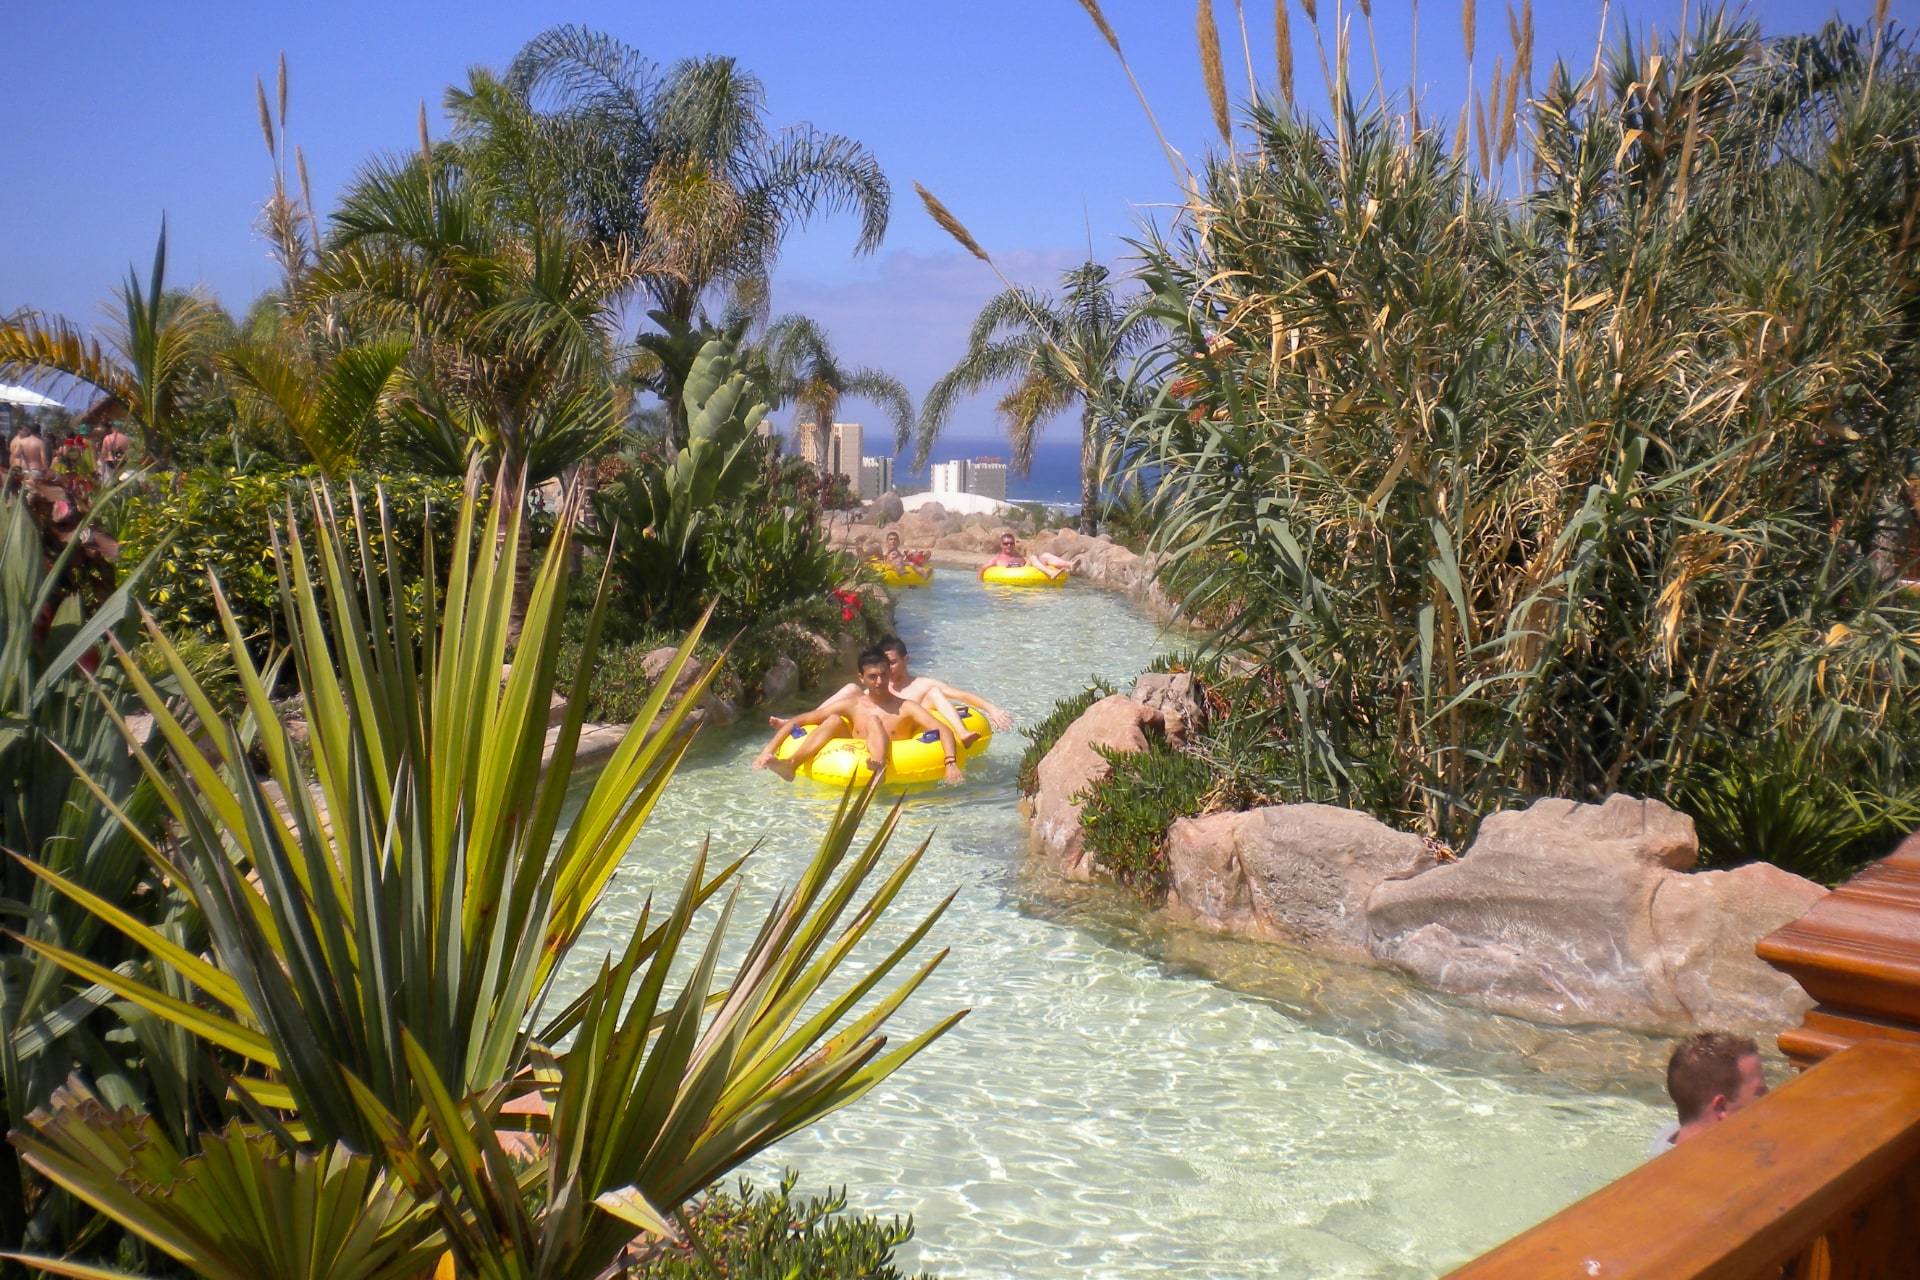 A colorful raft floating on the lazy river at Siam Park in Tenerife